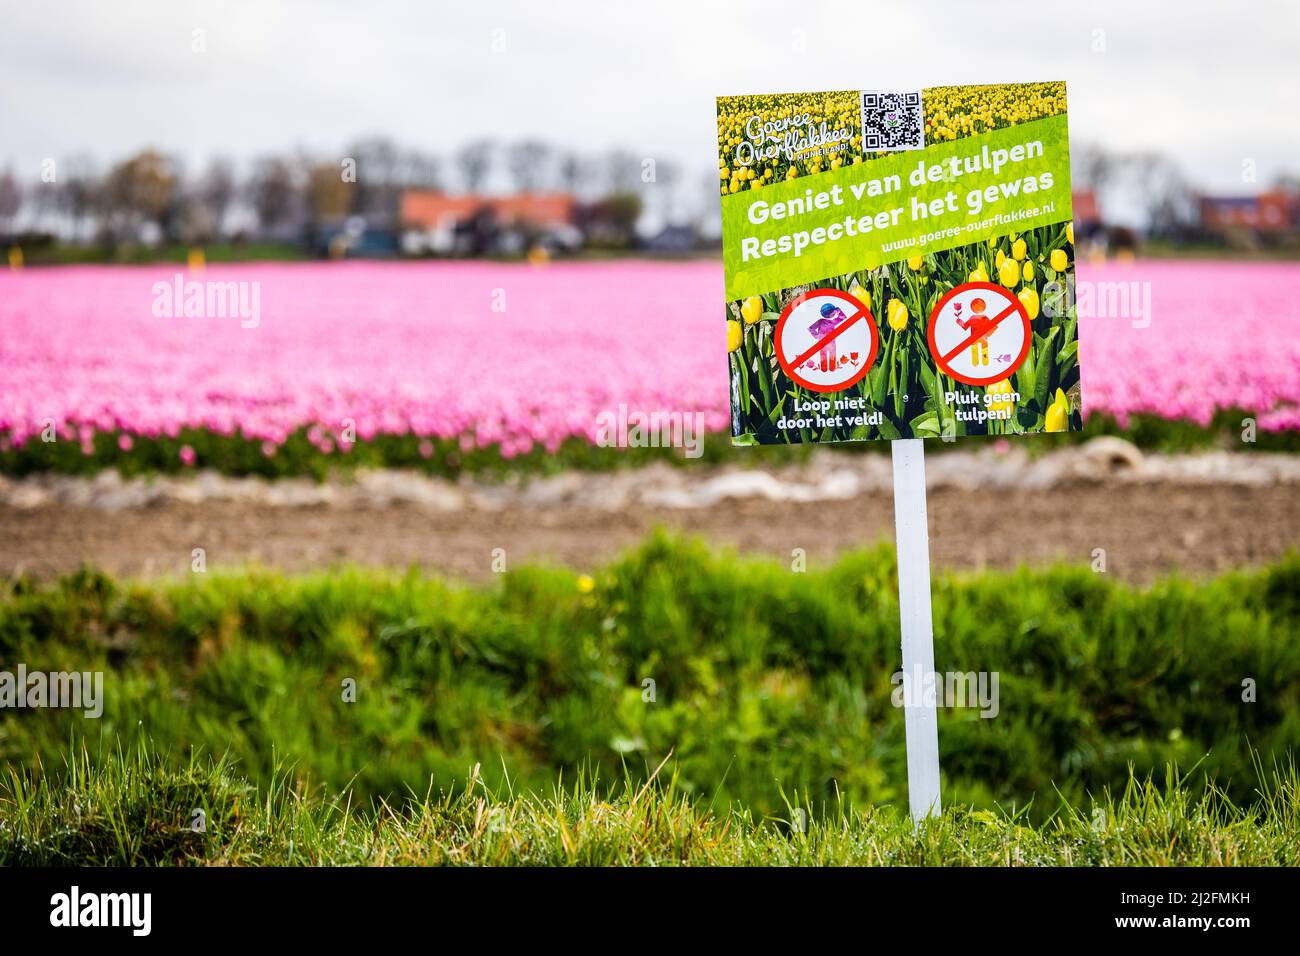 2022-03-31 08:06:50 31-03-2022, Zuid-Beijerland - Tulip fields in bloom on a field in Zuid-Beijerland. The tulips bloom early this year due to the beautiful sunny weather. Photo: ANP / Hollandse Hoogte / Jeffrey Groeneweg netherlands out - belgium out Stock Photo